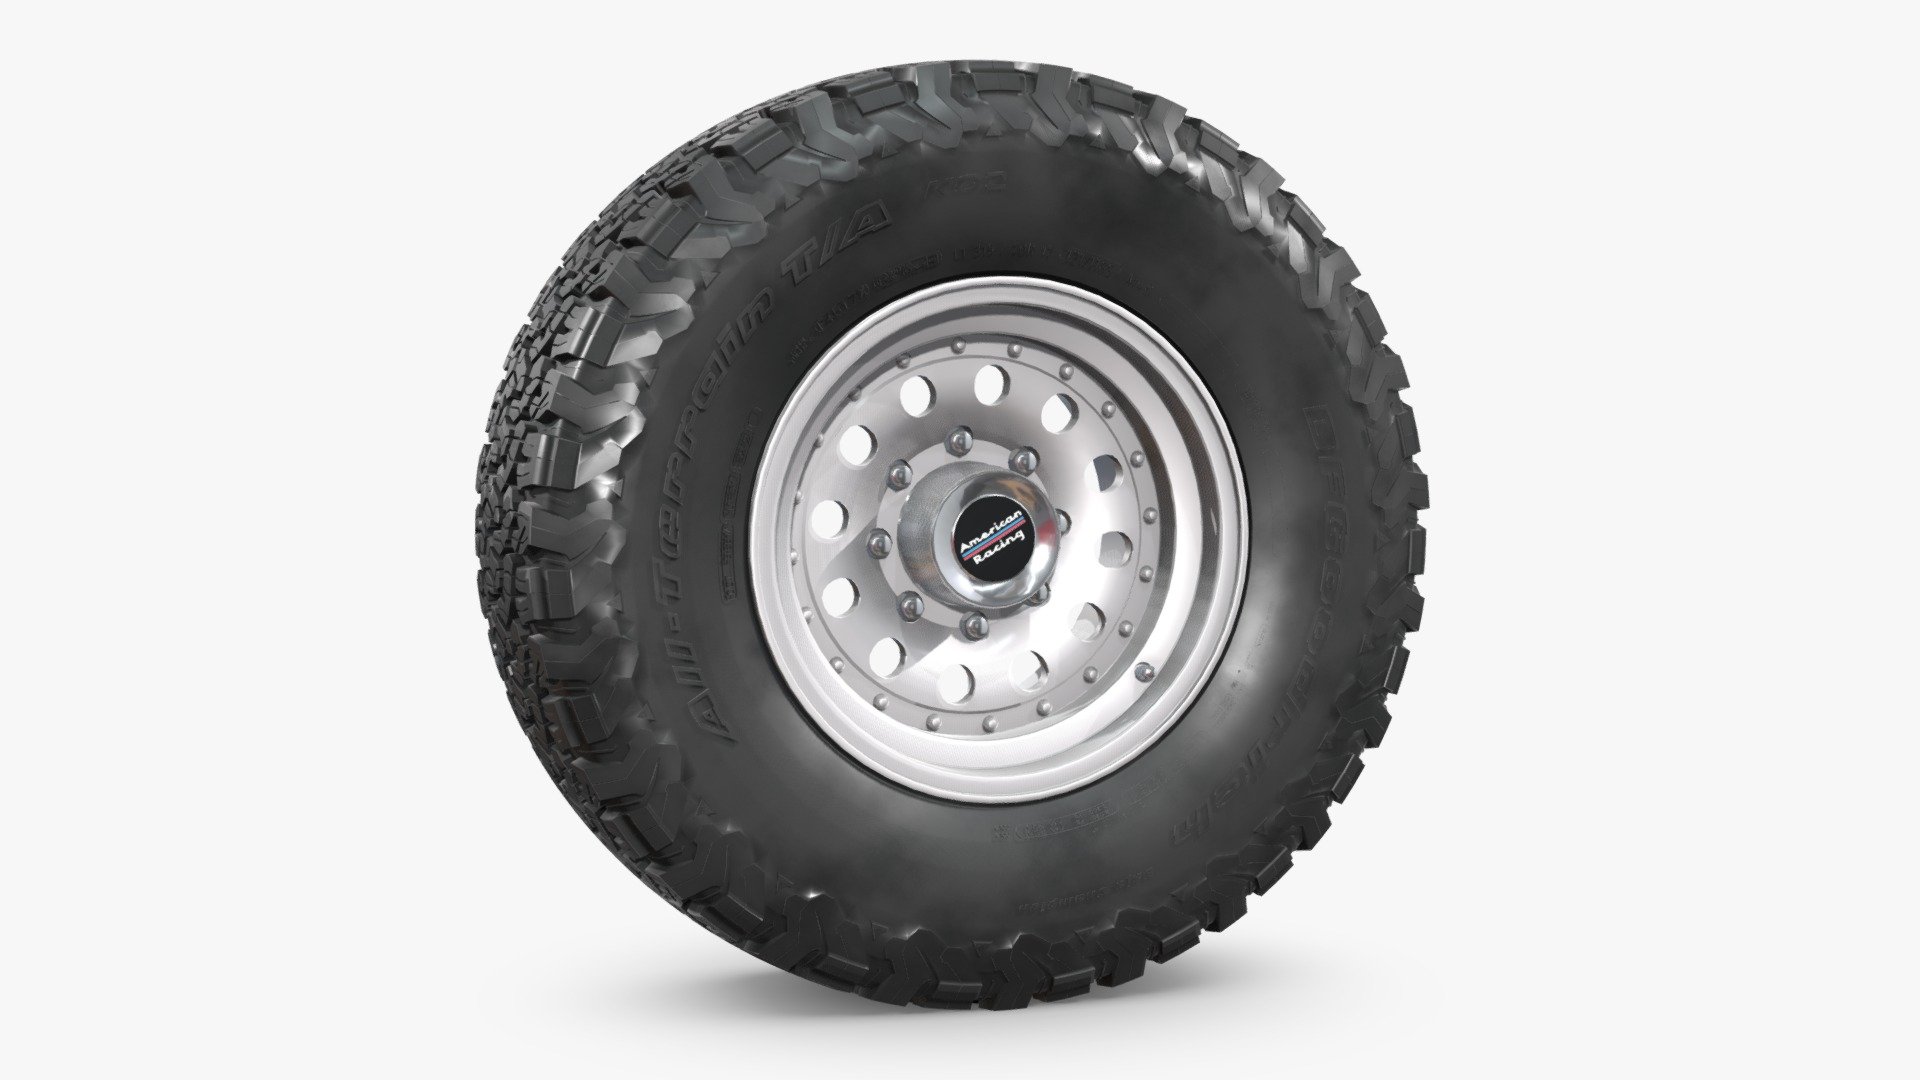 NN 3D store.

3D model of an off road wheel and tire combo.

The model is fully textured and was created with 3DS Max 2016 using the open subdivision modifier which has been left in the stack to adjust the level of detail.

There are also included a Blender format with textures.

Exchange files included: 3DS, FBX and OBJ.

SPECIFICATIONS:

The model has 76.000 polygons.

Scale/transform is set to 100%, units are set to centimeters, texture paths are stripped and and it is made to real world scale.

PRESENTATION:

Product is ready to render out of the box only in 3DSMax.

Lights and cameras are not included.

MATERIALS AND TEXTURES:

All textures are included and mapped in all files but they will render like the preview images only in 3DSMax with V-Ray, the rest of the files might have to be adjusted depending on the software you are using.

JPG textures have 2048 x 2048 resolution 3d model